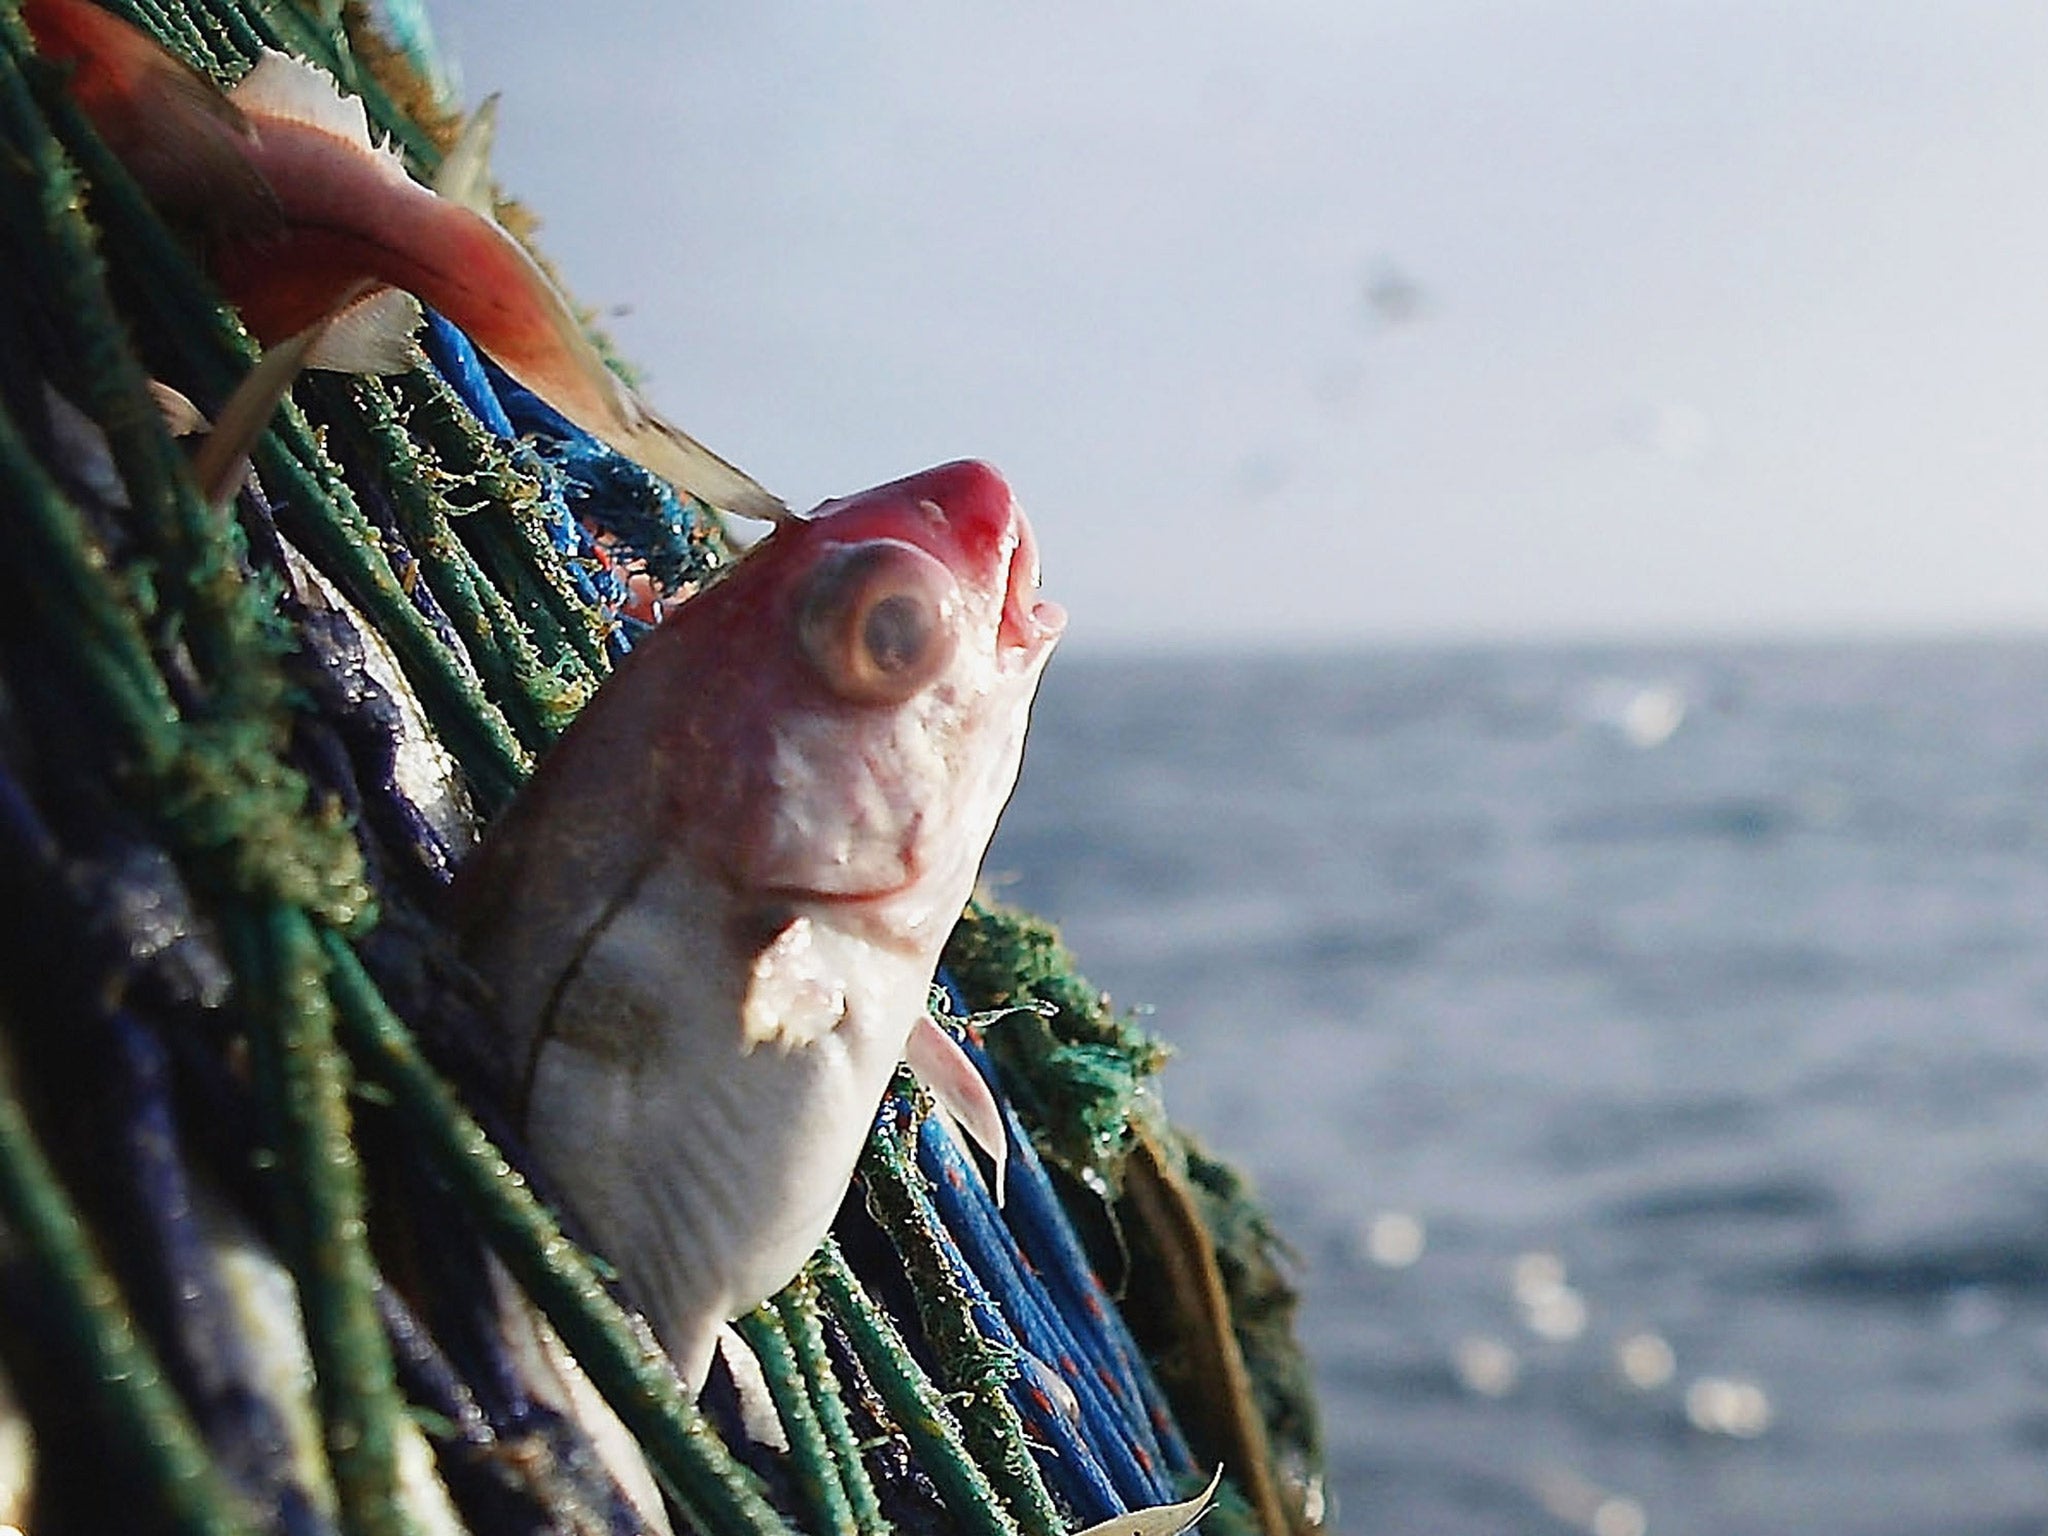 More than 32 million tonnes of caught fish goes unreported each year, the study claims